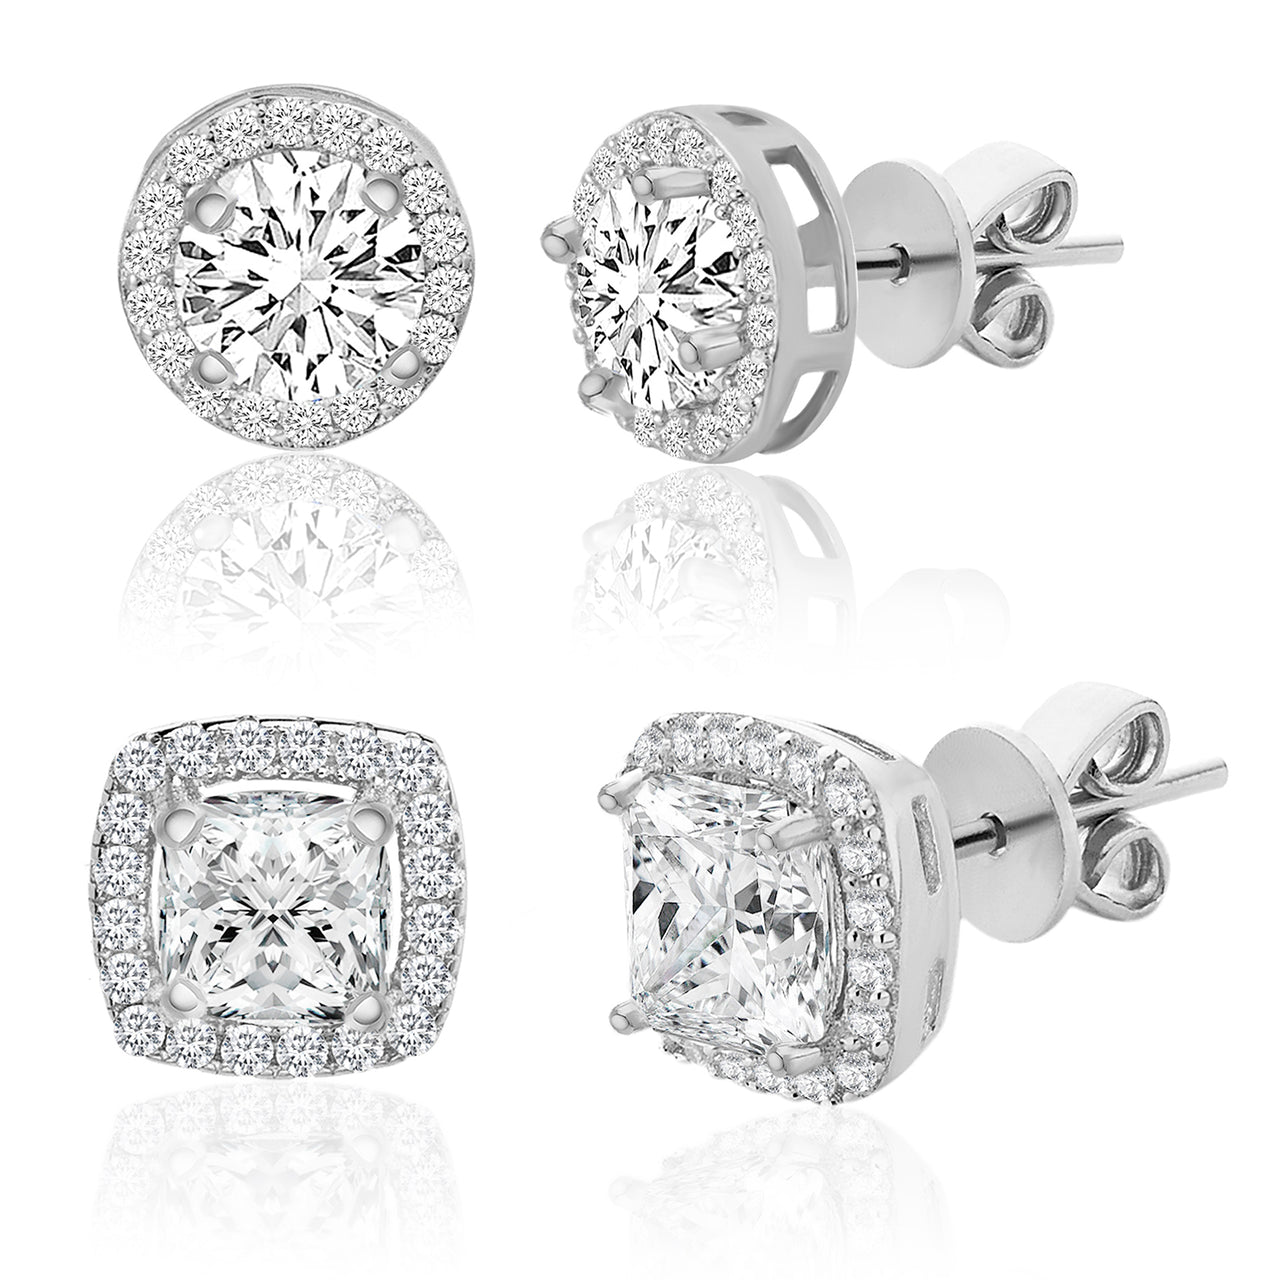 Lesa Michele Rhodium Plated Sterling Silver Cubic Zirconia Round and Square Duo Stud Earring Set